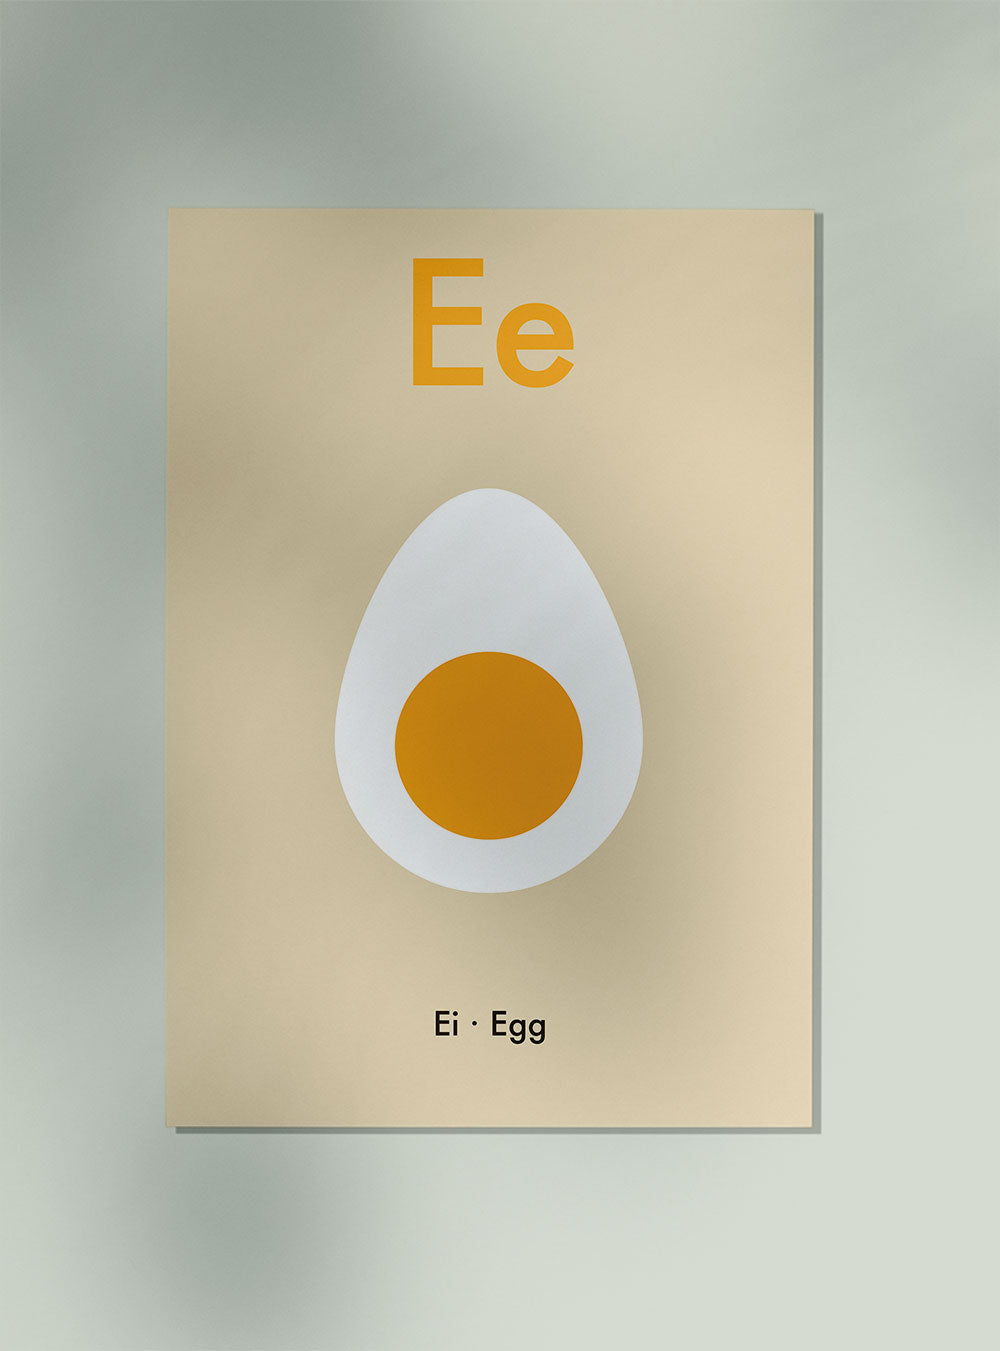 E for Egg - Children's Alphabet Poster in German and English